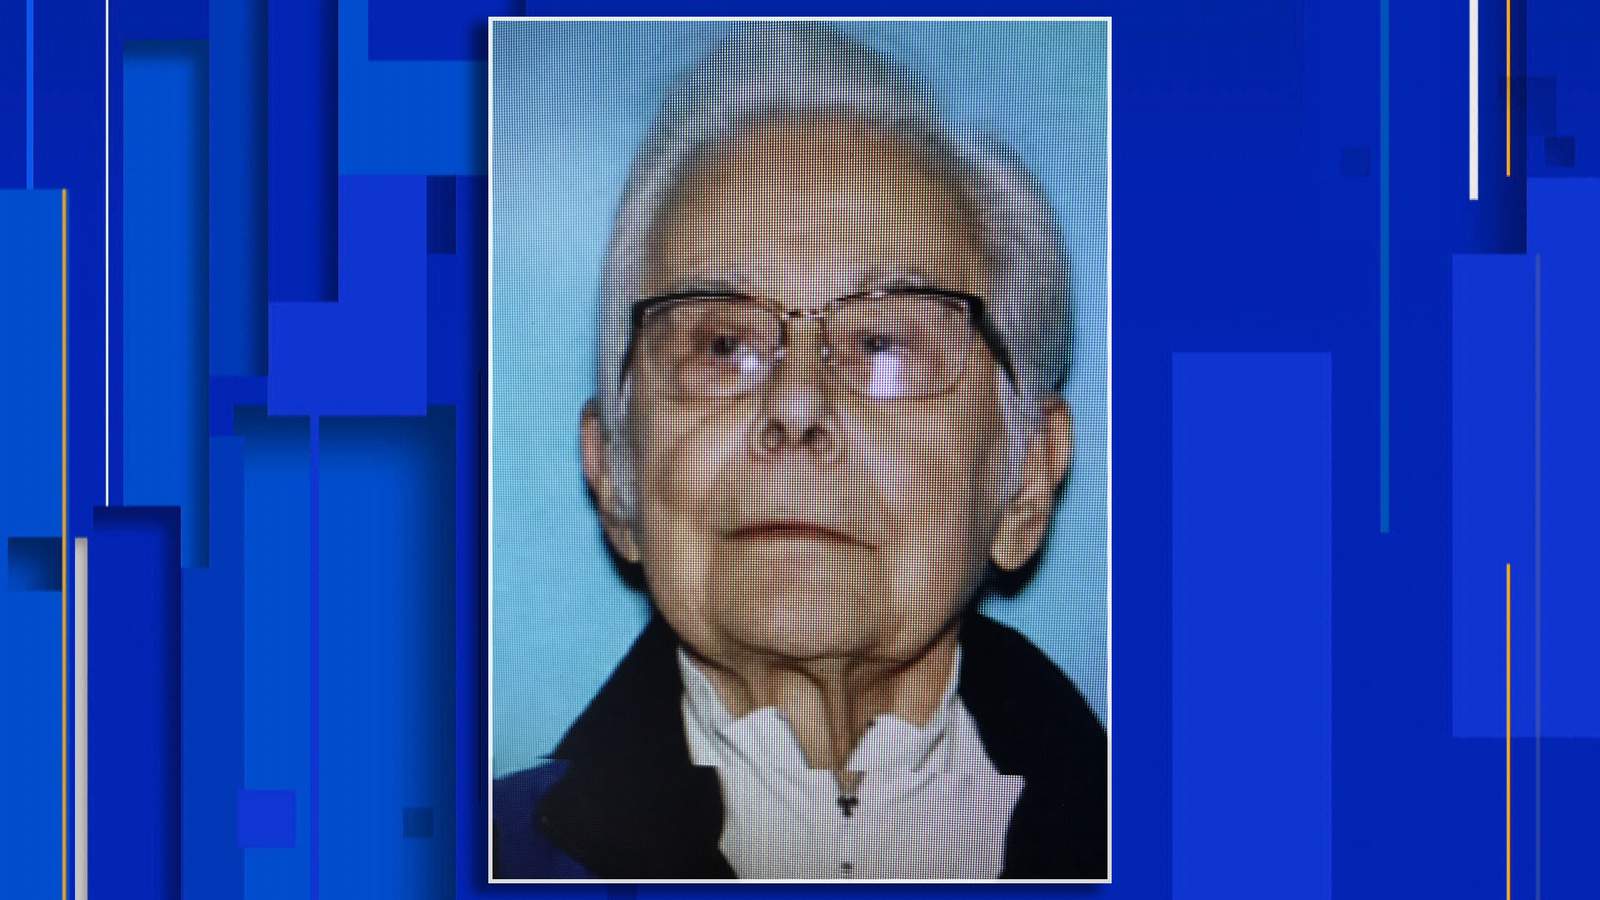 Grosse Pointe Farms police seek missing 89-year-old man with dementia